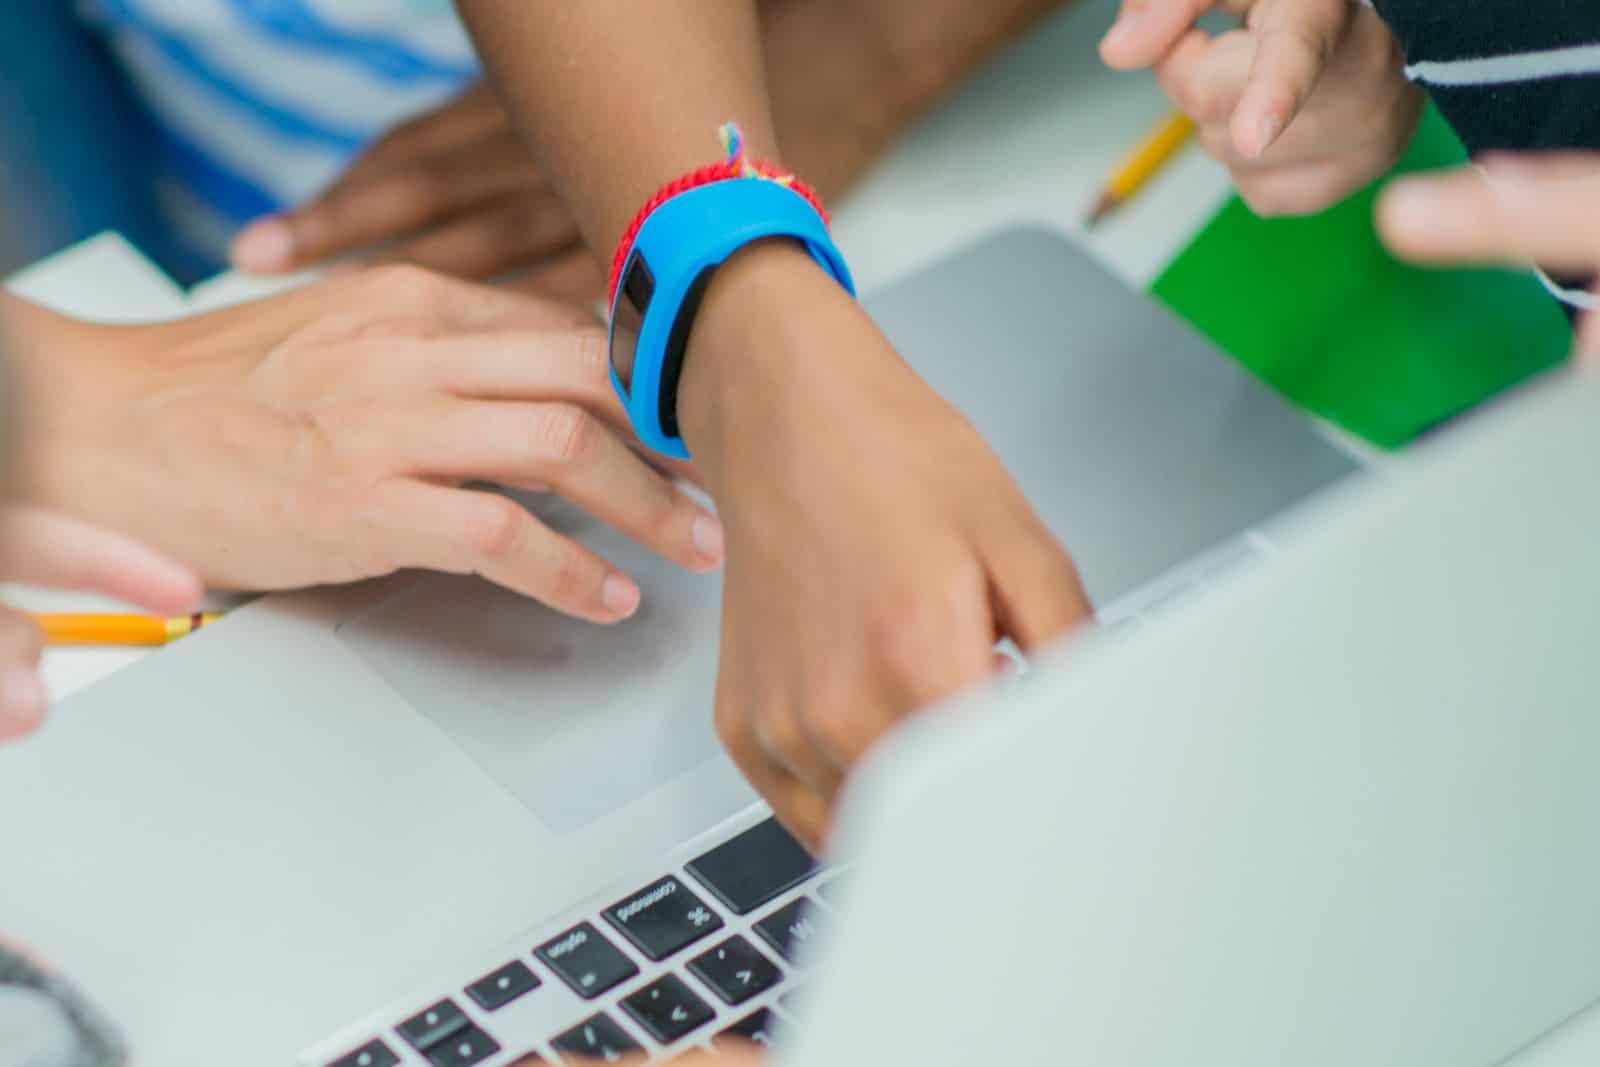 Picture of a tween's wrist wearing a blue smartwatch, pointing at a laptop screen